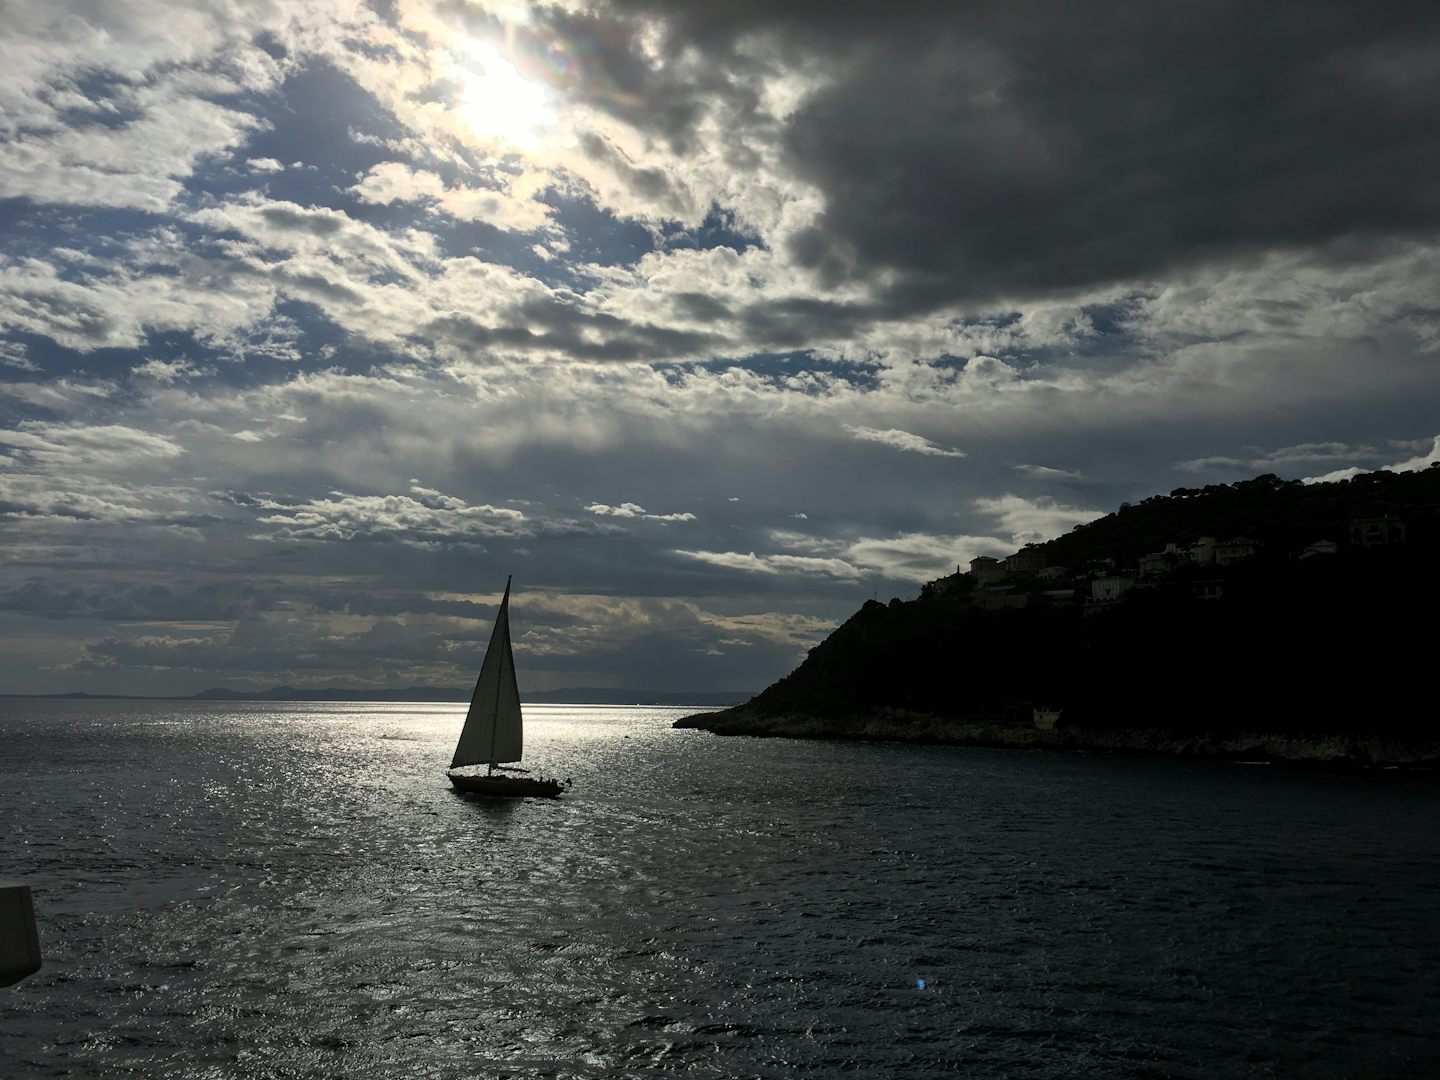 A yatch sailing out of Vile Franche